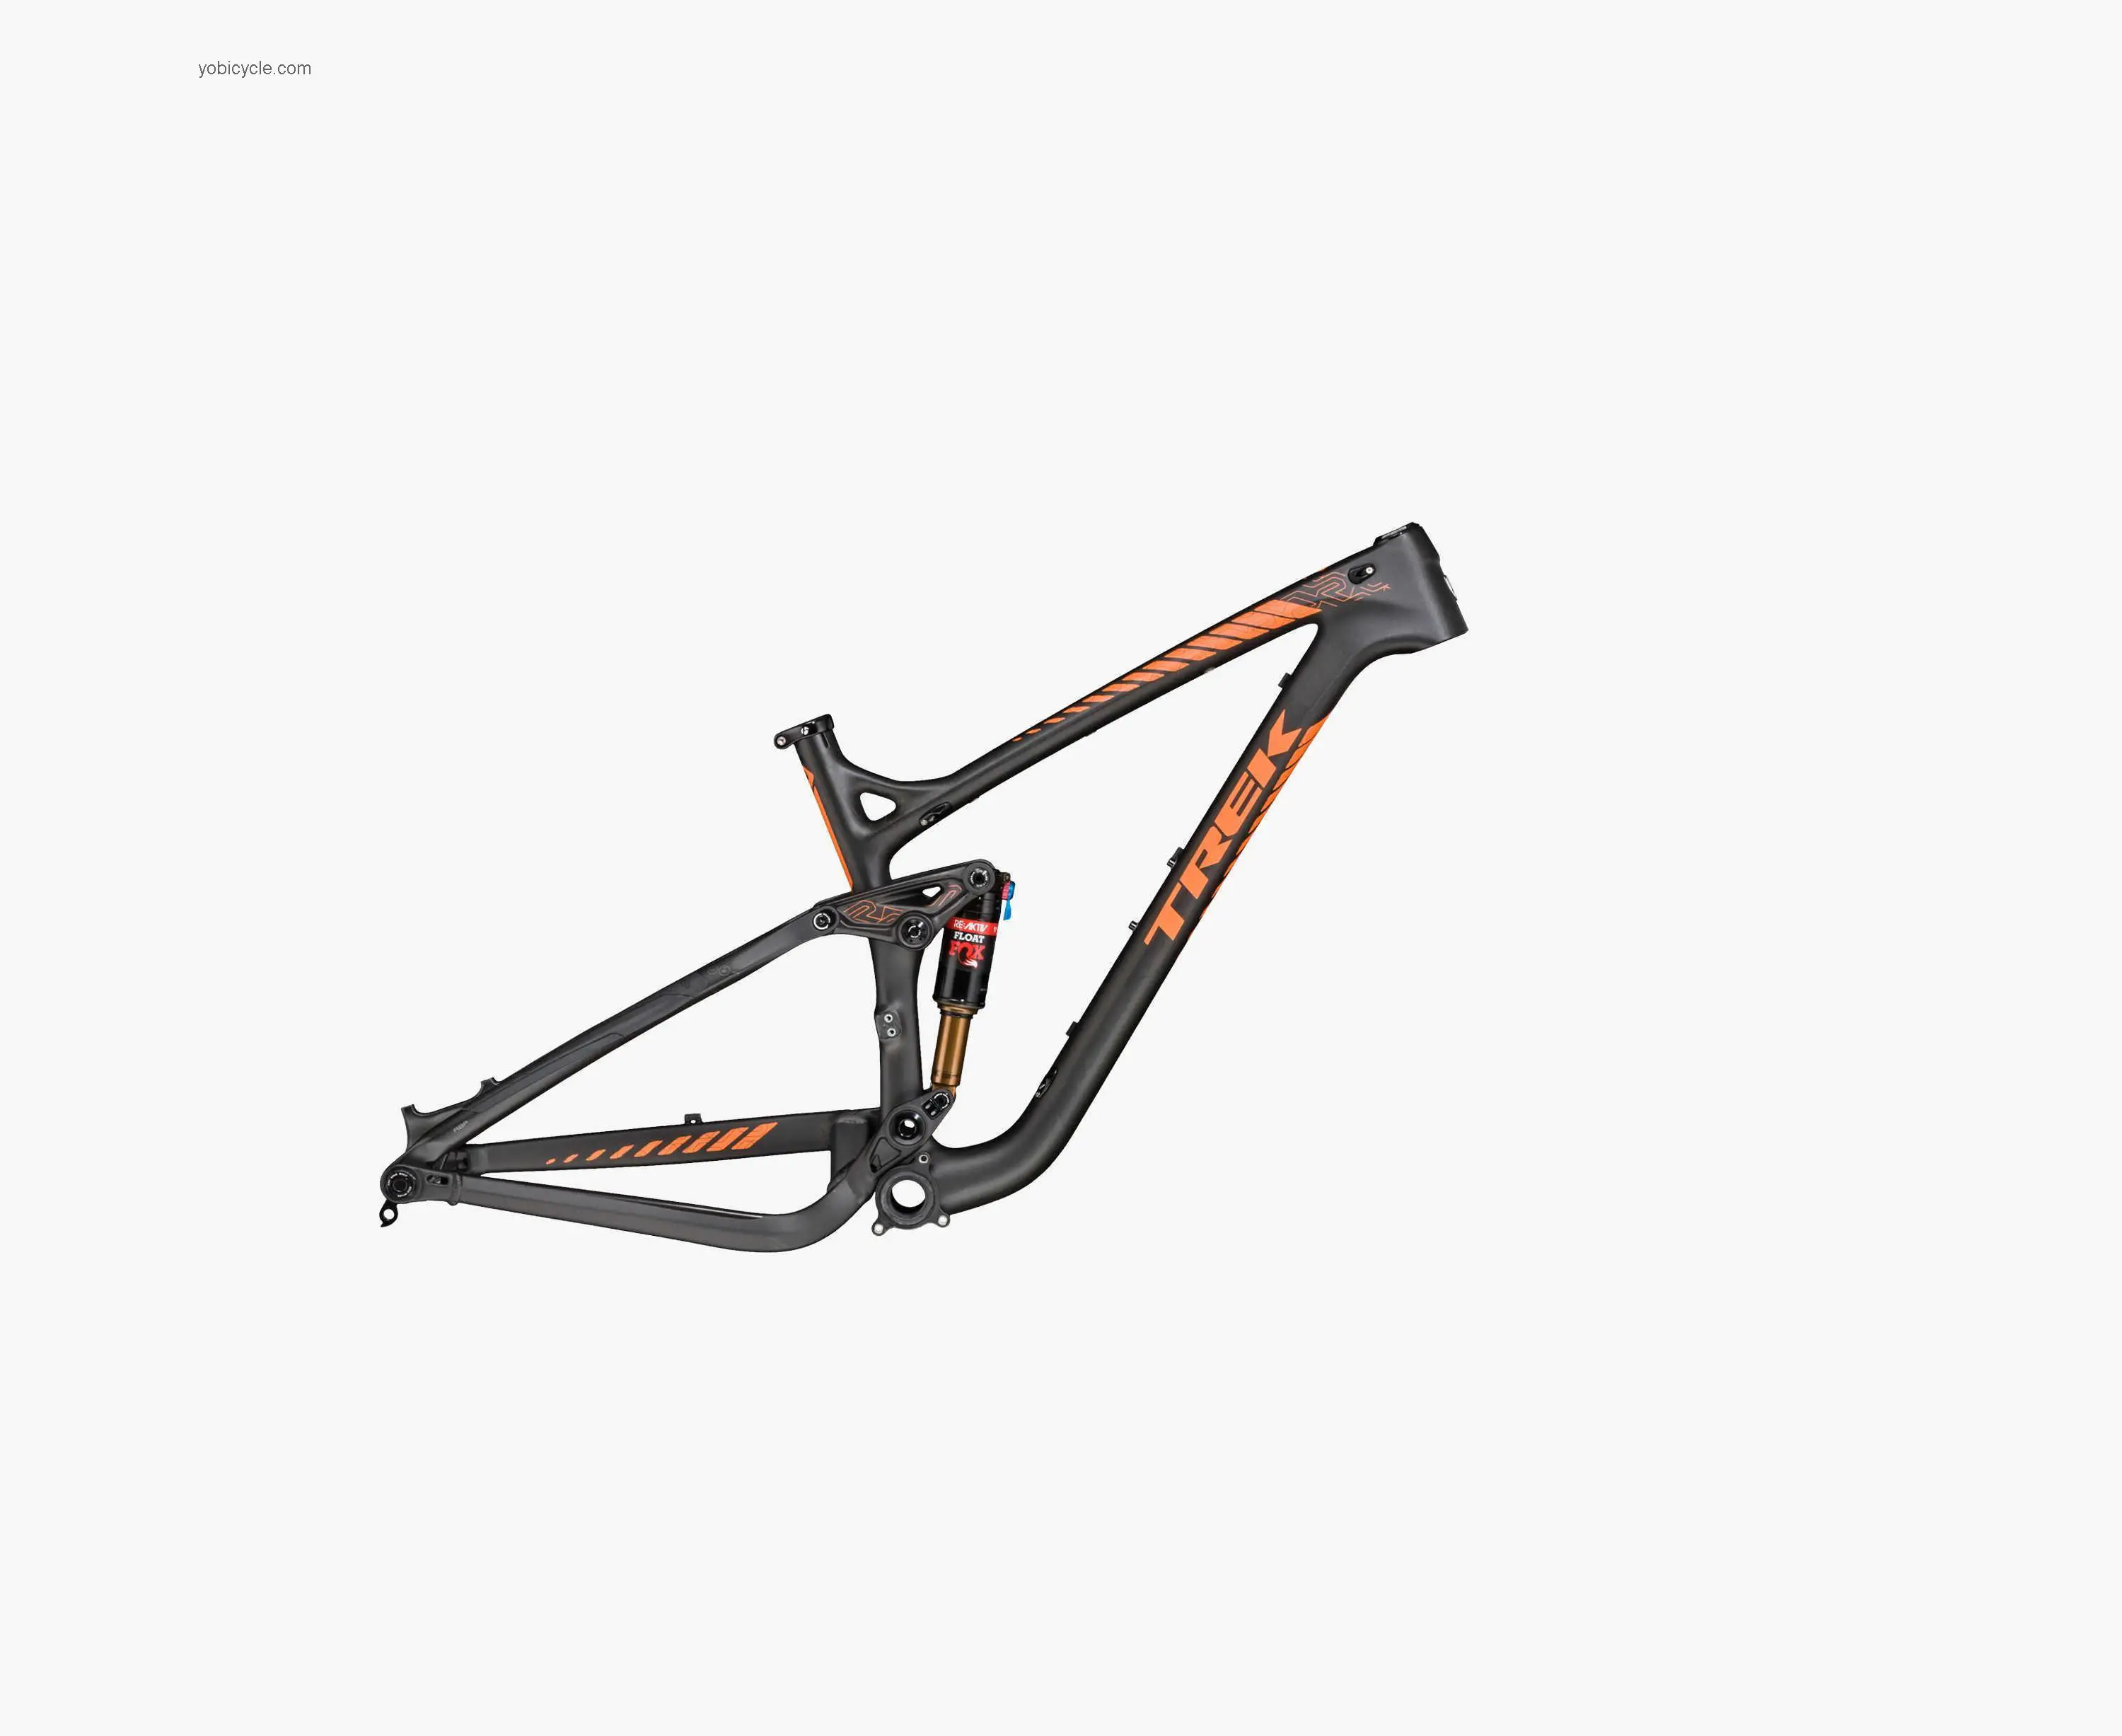 Trek  Remedy 27.5 Carbon Frameset Technical data and specifications